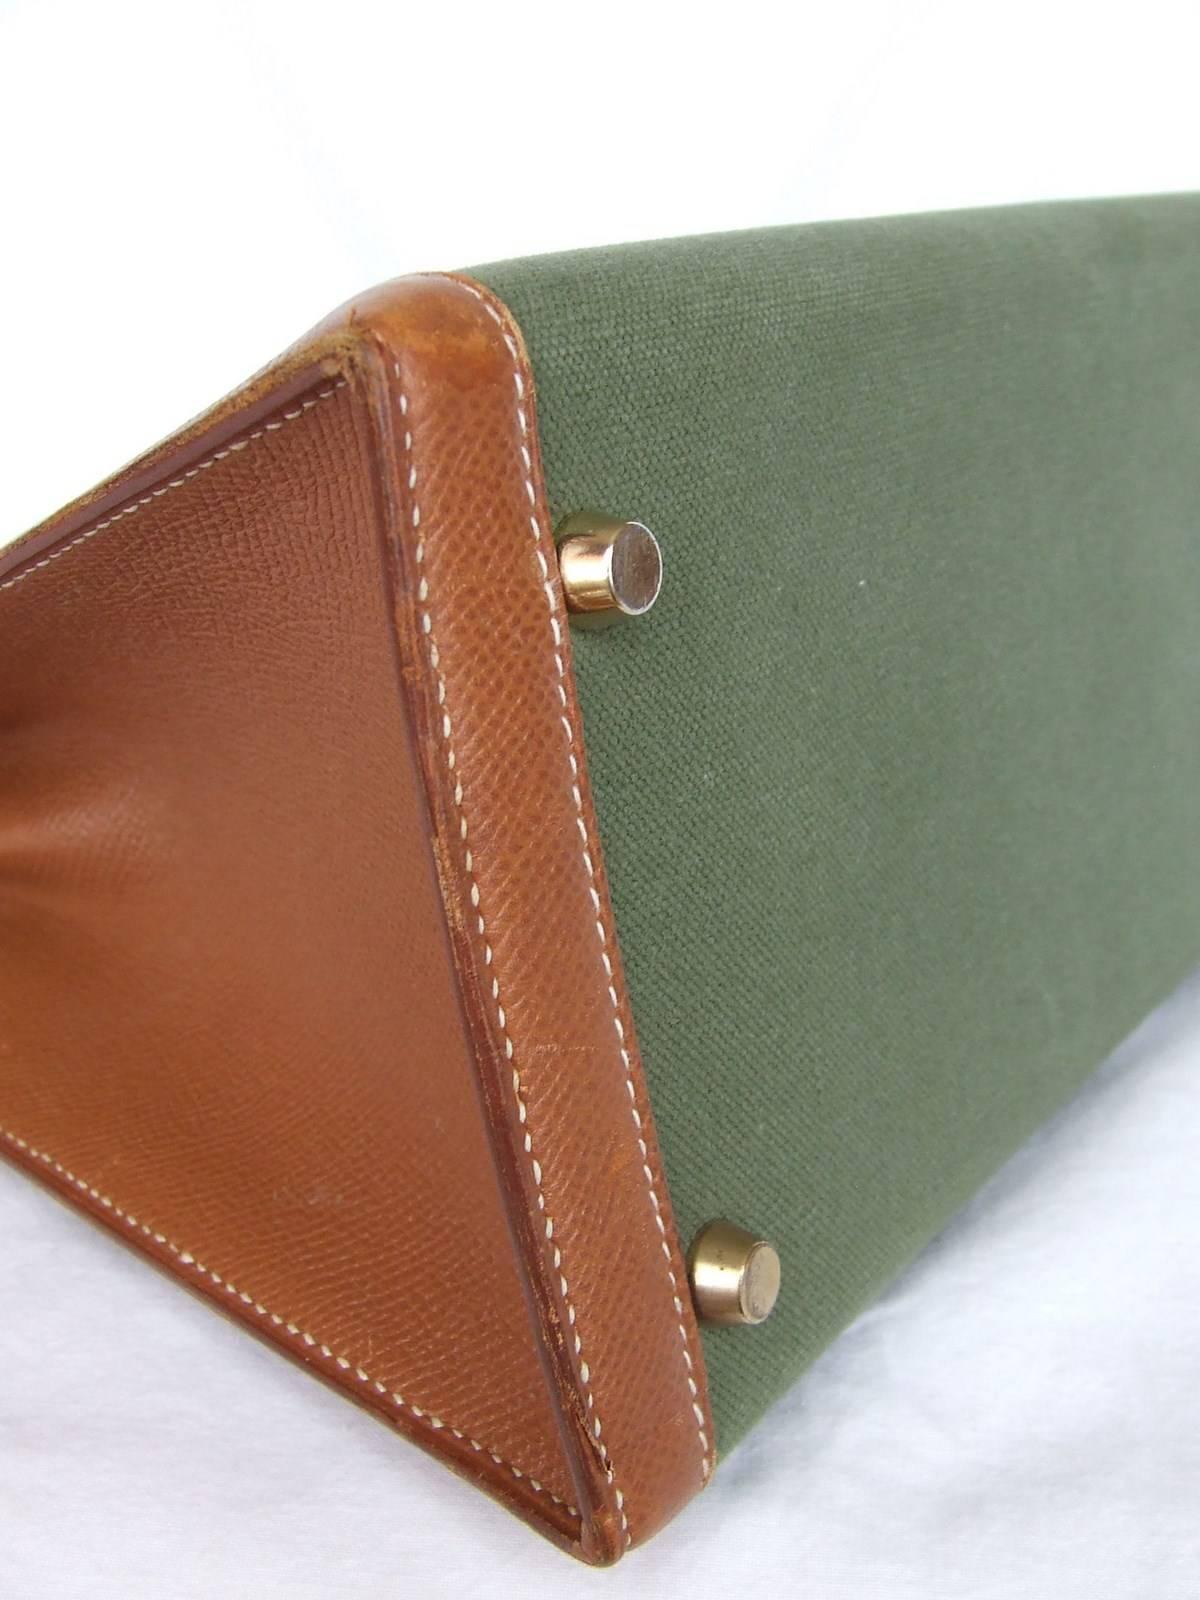 Hermes Kelly 32 Sellier Bag Bi Matiere Green Canvas Cognac Leather GHW Rare  1